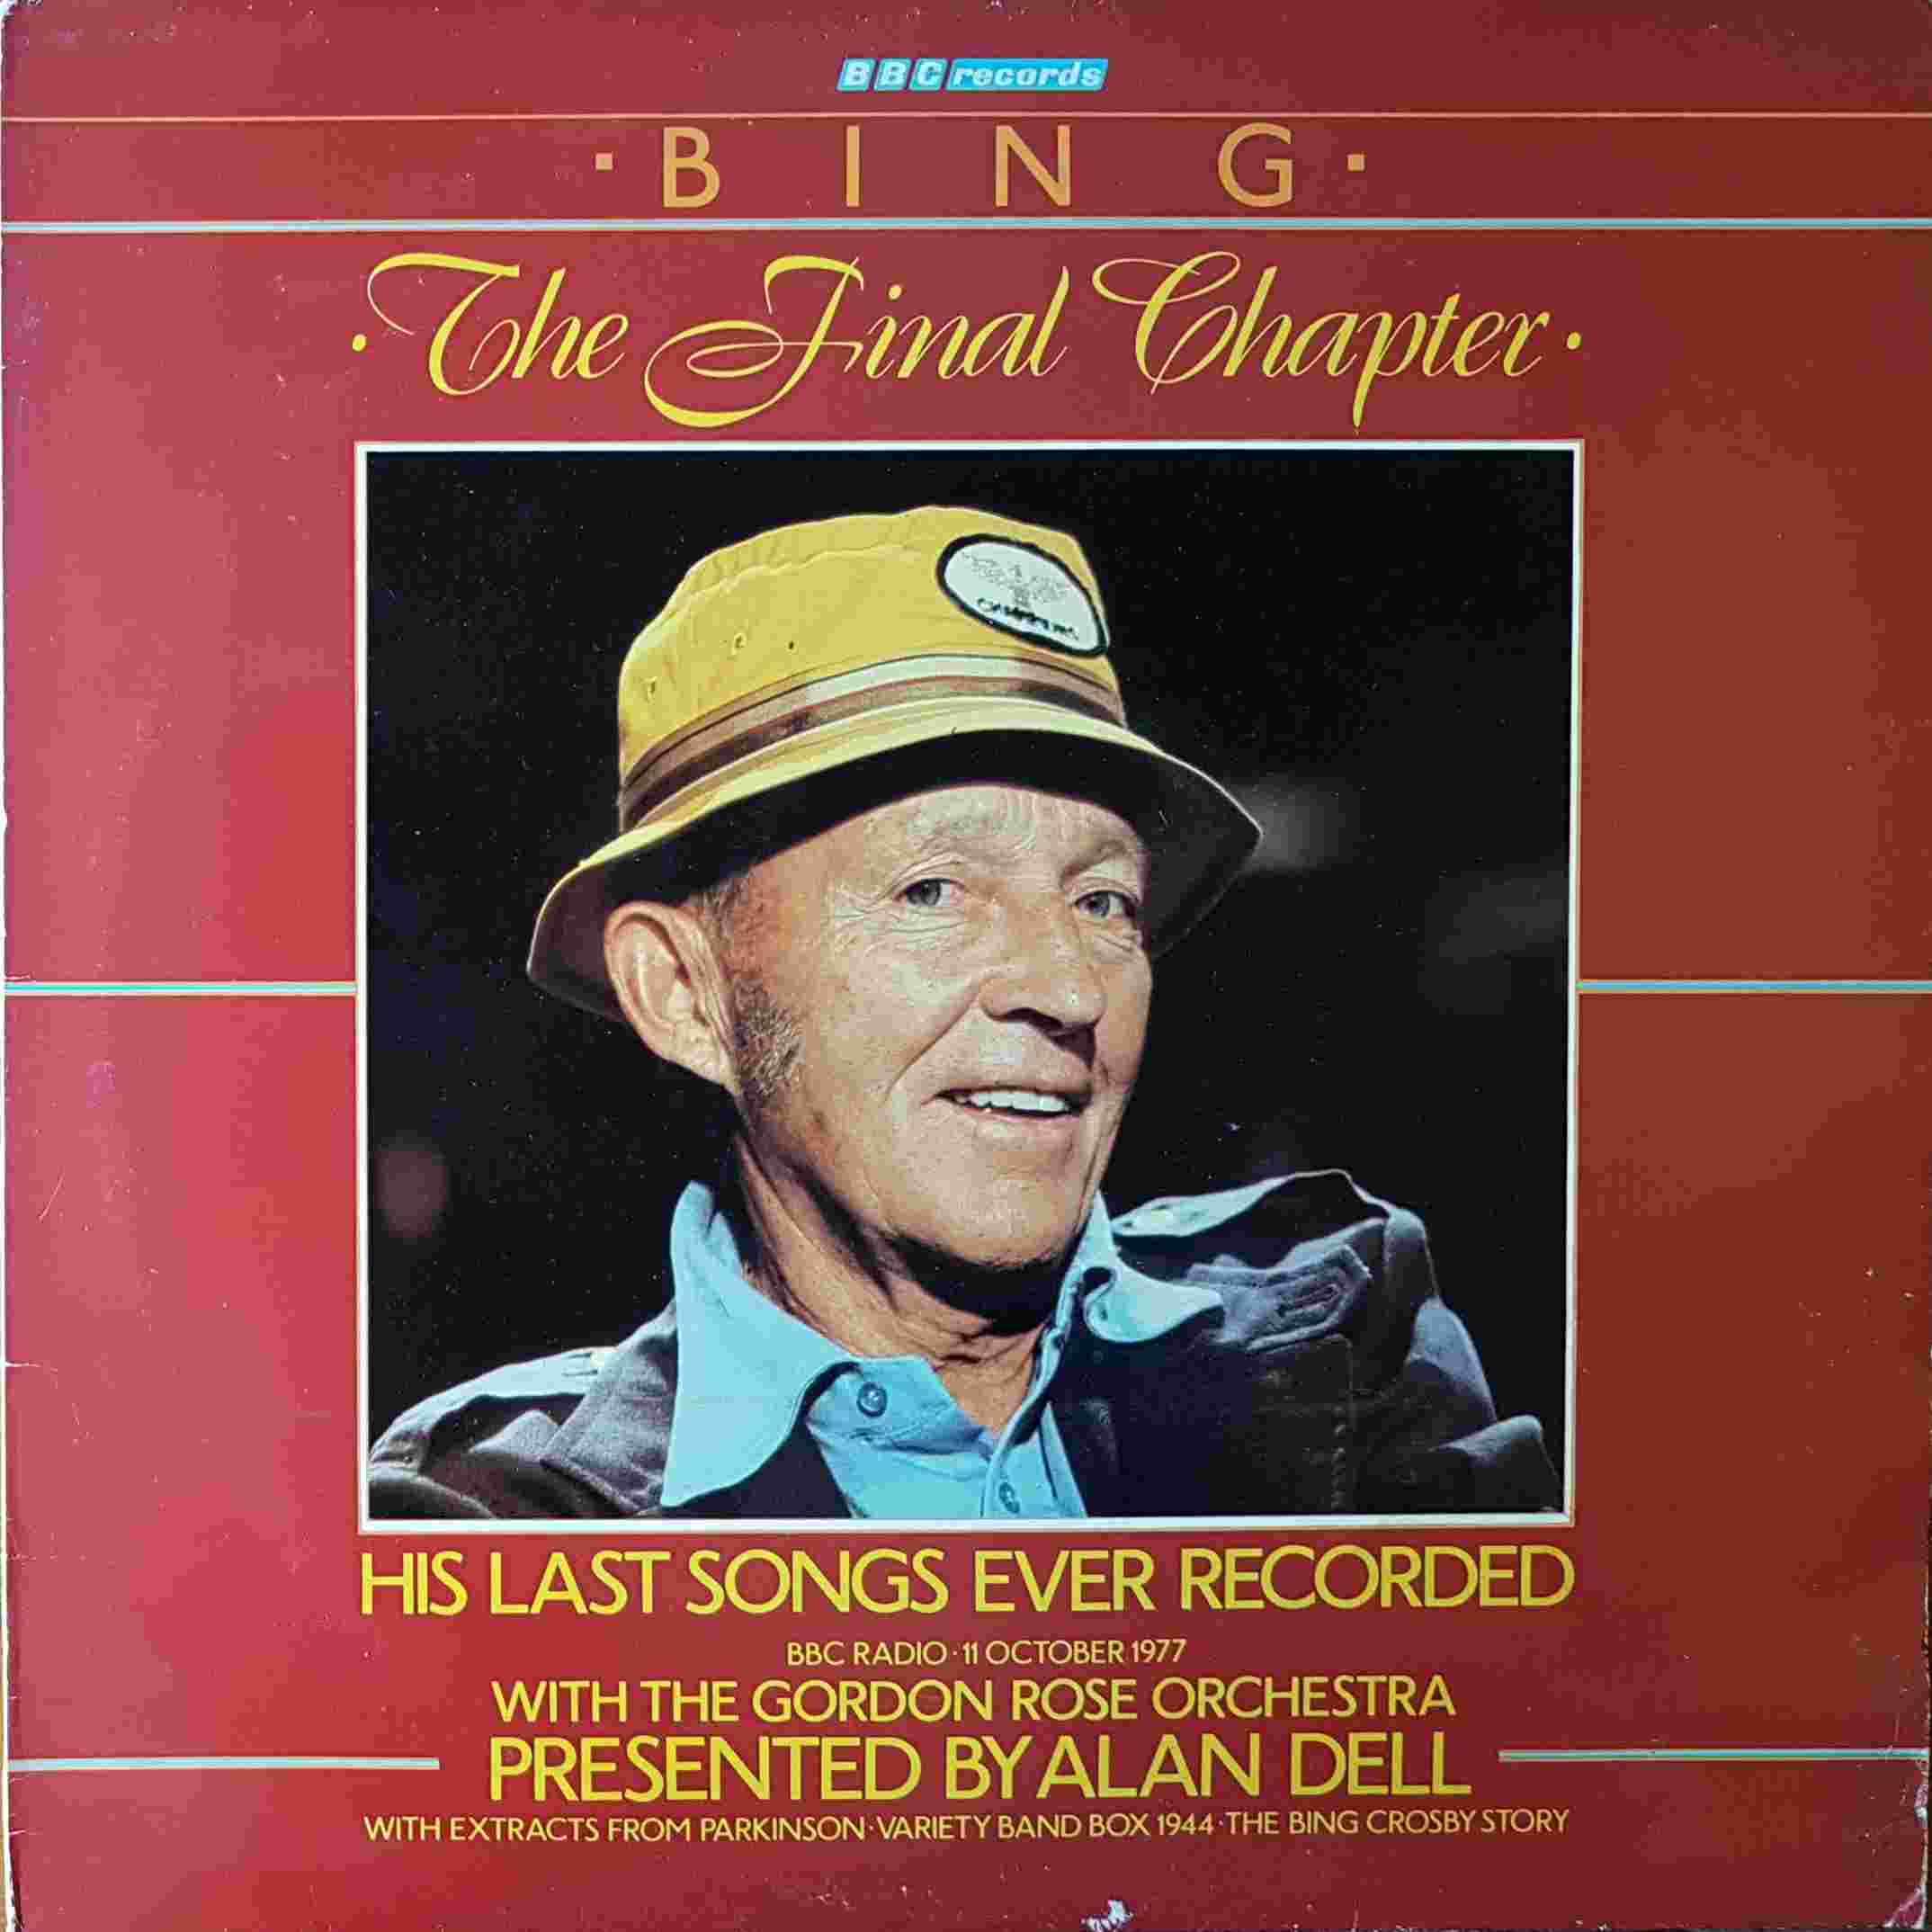 Picture of REB 398 Bing Crosby - The final chapter by artist Bing Crosby from the BBC albums - Records and Tapes library